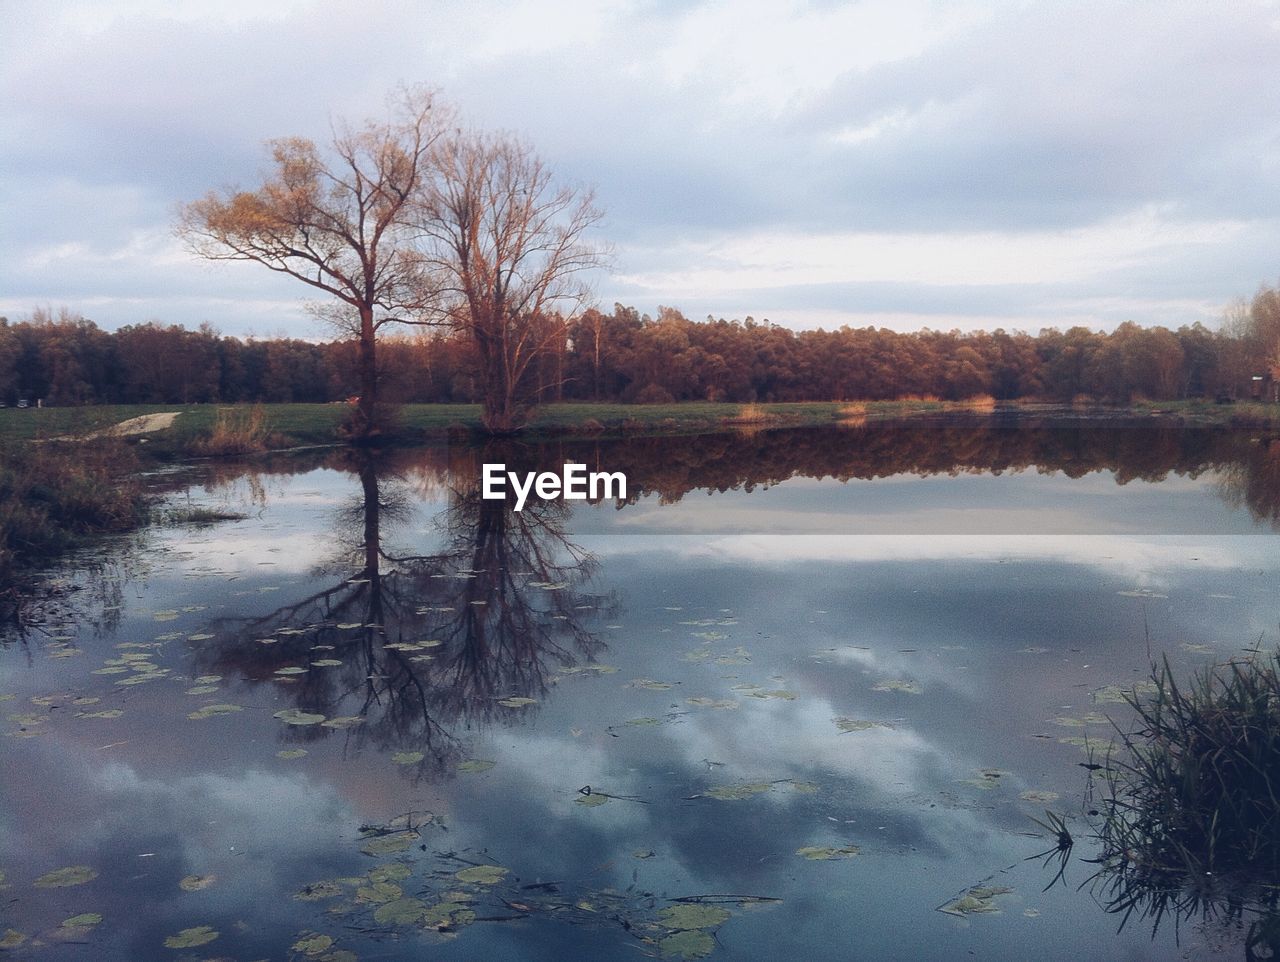 Reflection of trees and cloudy sky on calm lake